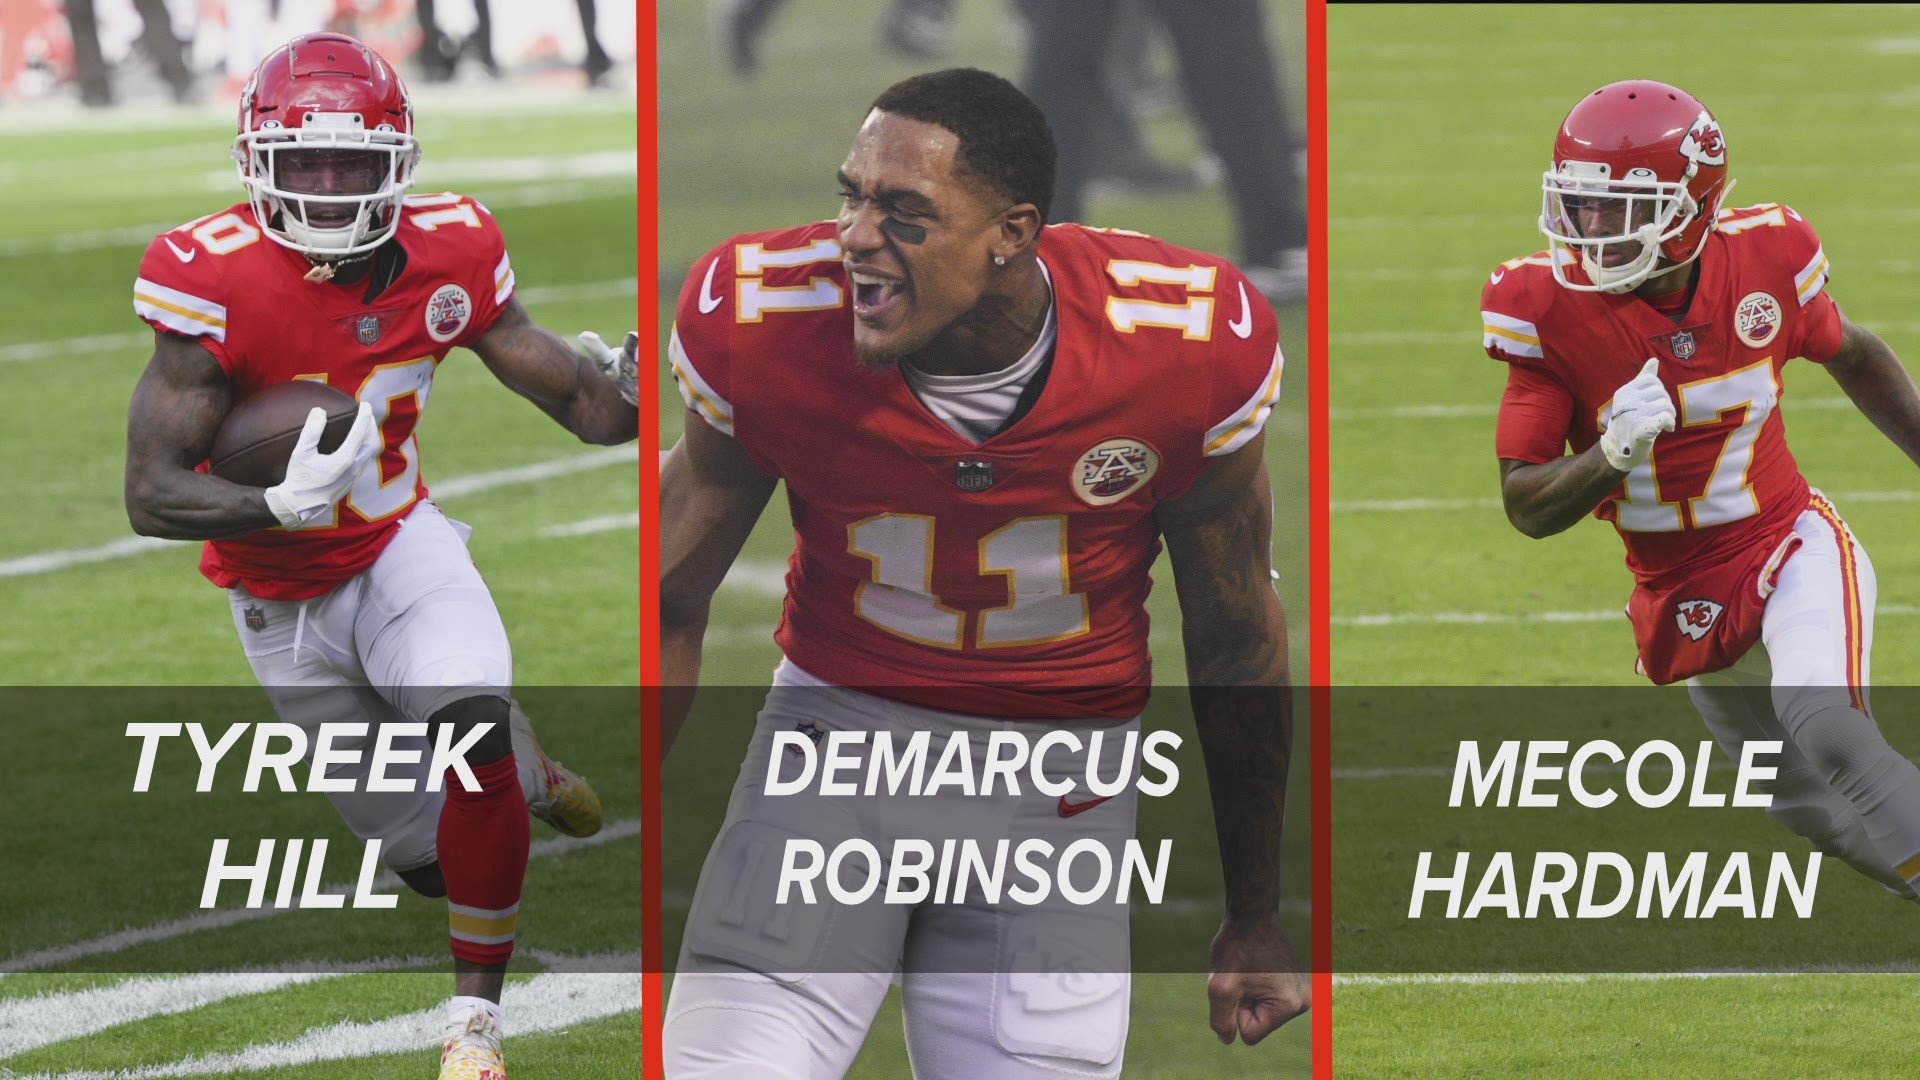 Georgia has produced countless Super Bowl champions. But these three all landed on the same team at the same time.